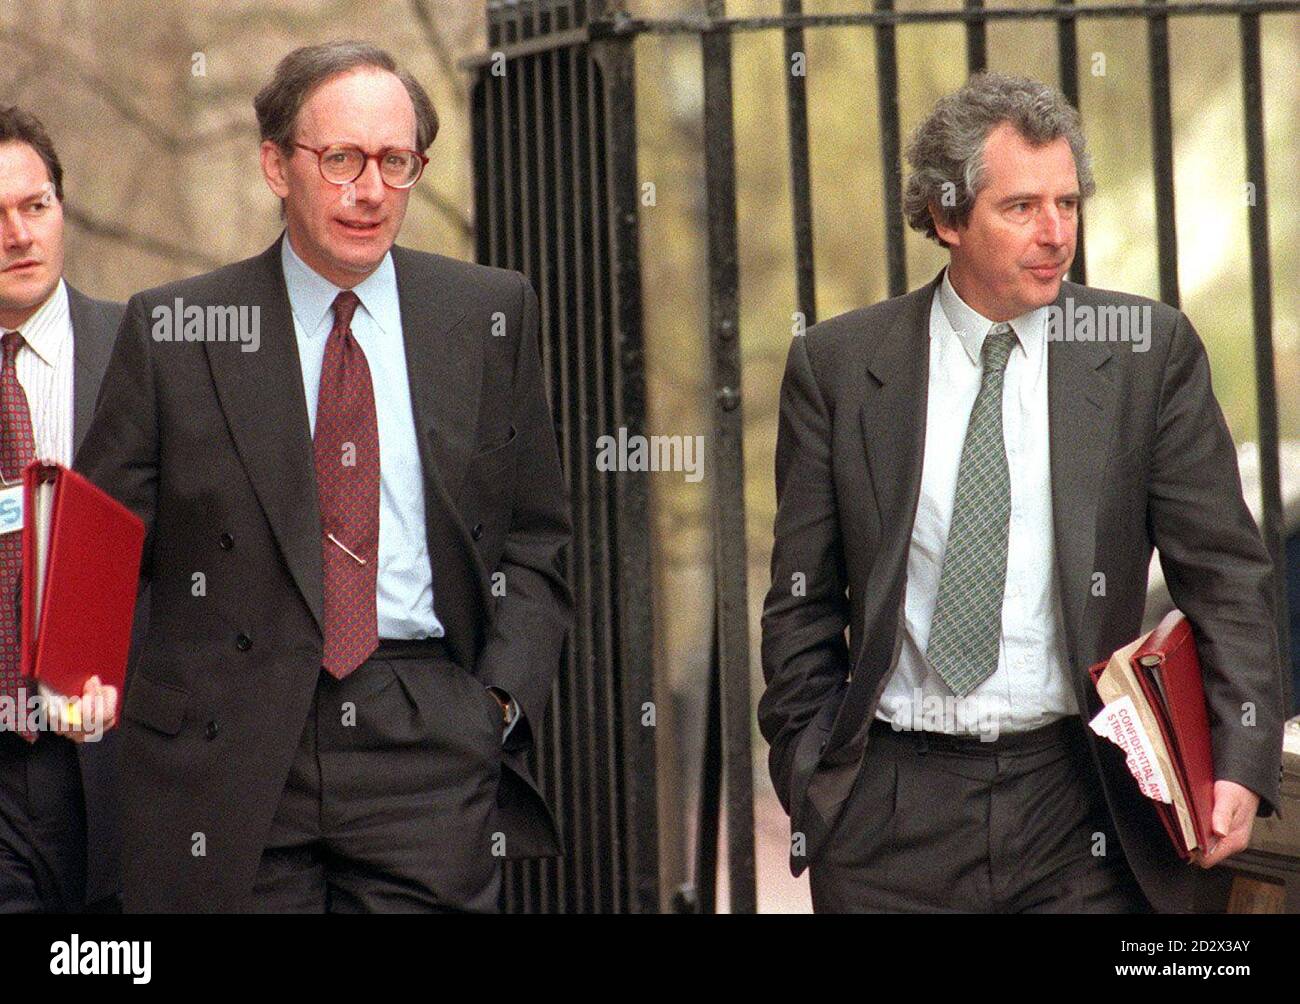 Defence Secretary Malcom Rifkind (left) and Chief Secretary to the Treasury William Waldegrave (right) arriving in Downing Street for the Cabinet Meeting.  **Man on far left un-identified** Stock Photo